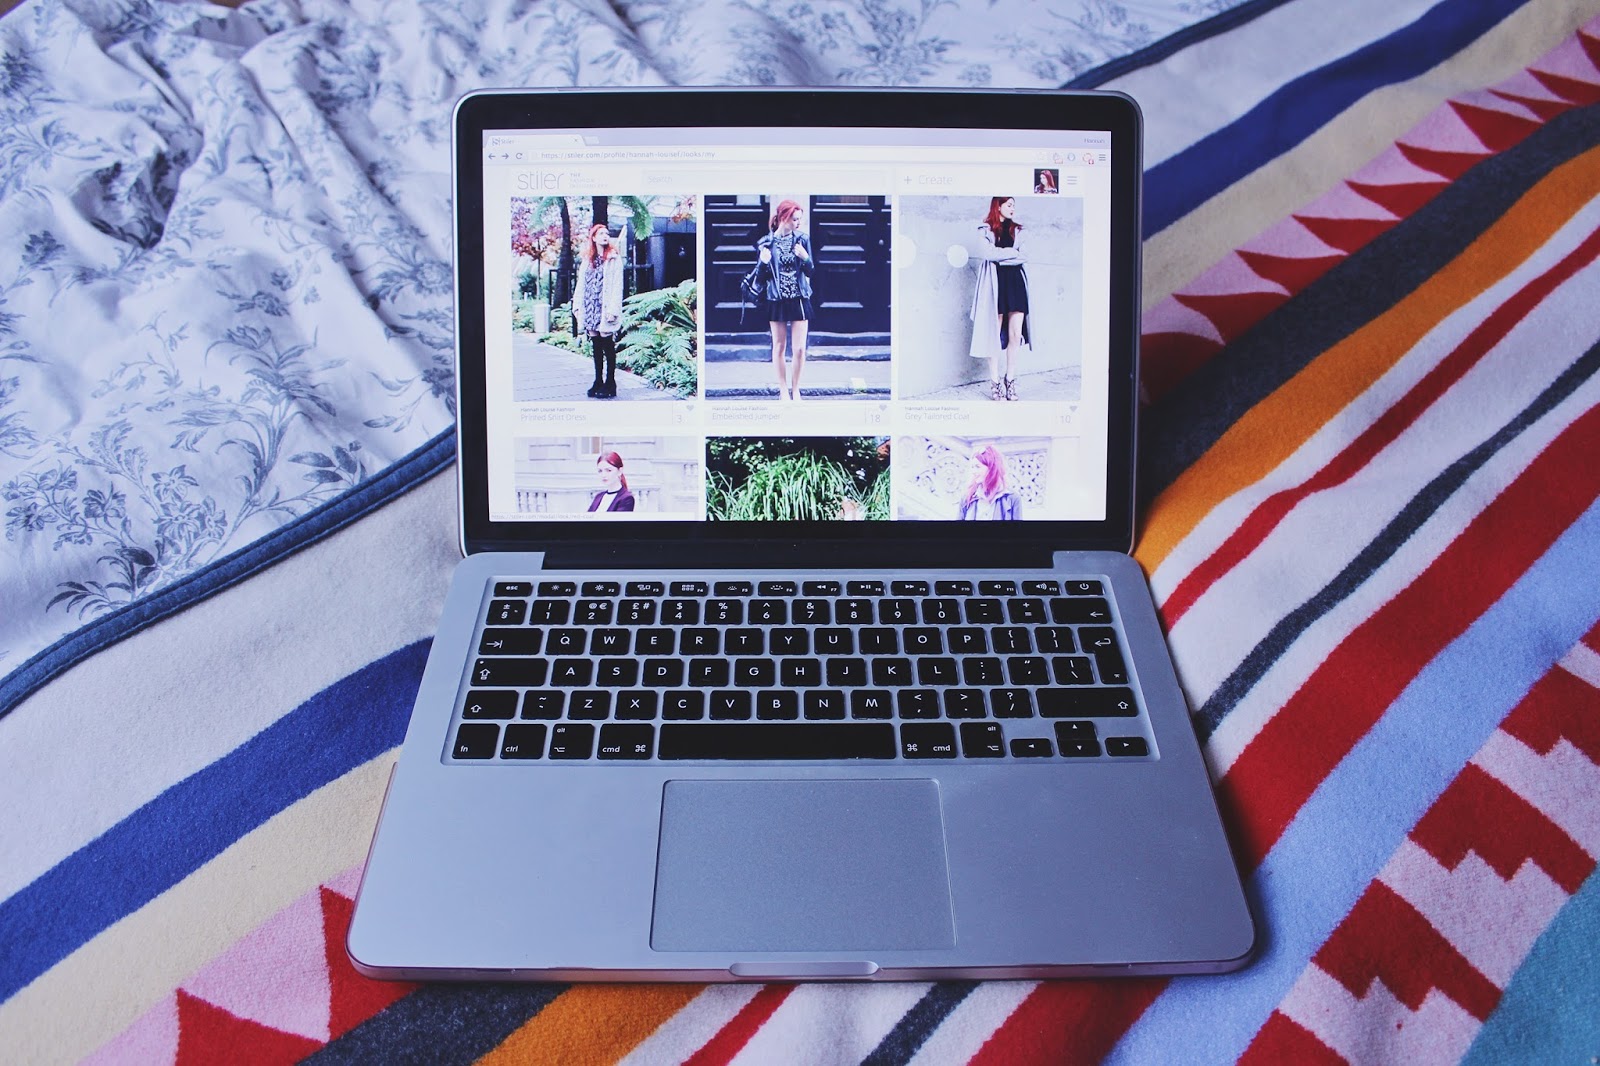 Introducing: Stiler (your fave new outfit sharing platform)